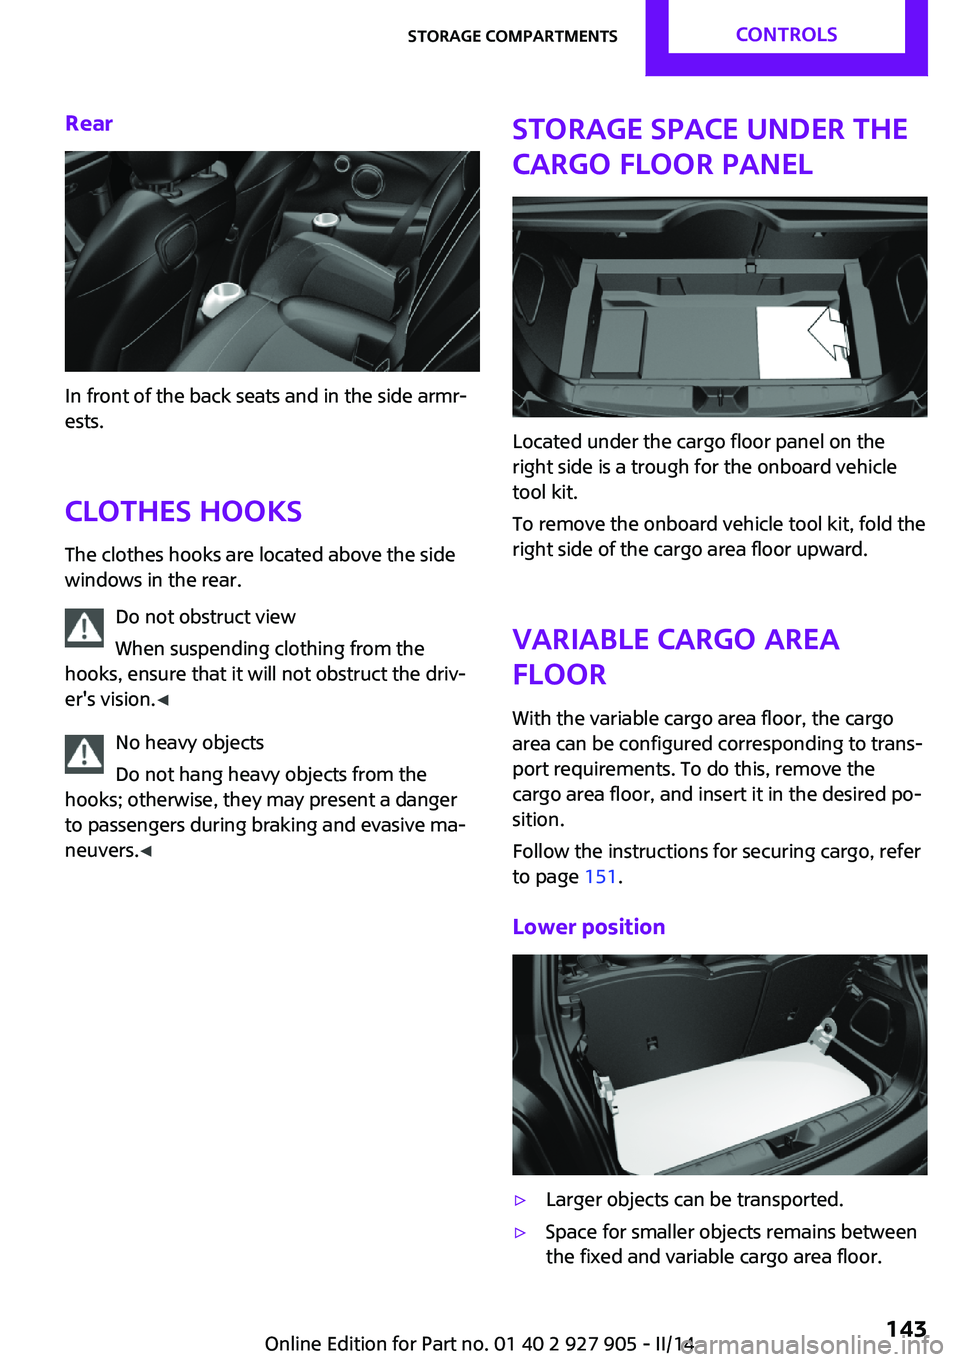 MINI COOPER 2014  Owners Manual Rear
In front of the back seats and in the side armr‐
ests.
Clothes hooks The clothes hooks are located above the side
windows in the rear.
Do not obstruct view
When suspending clothing from the
hoo